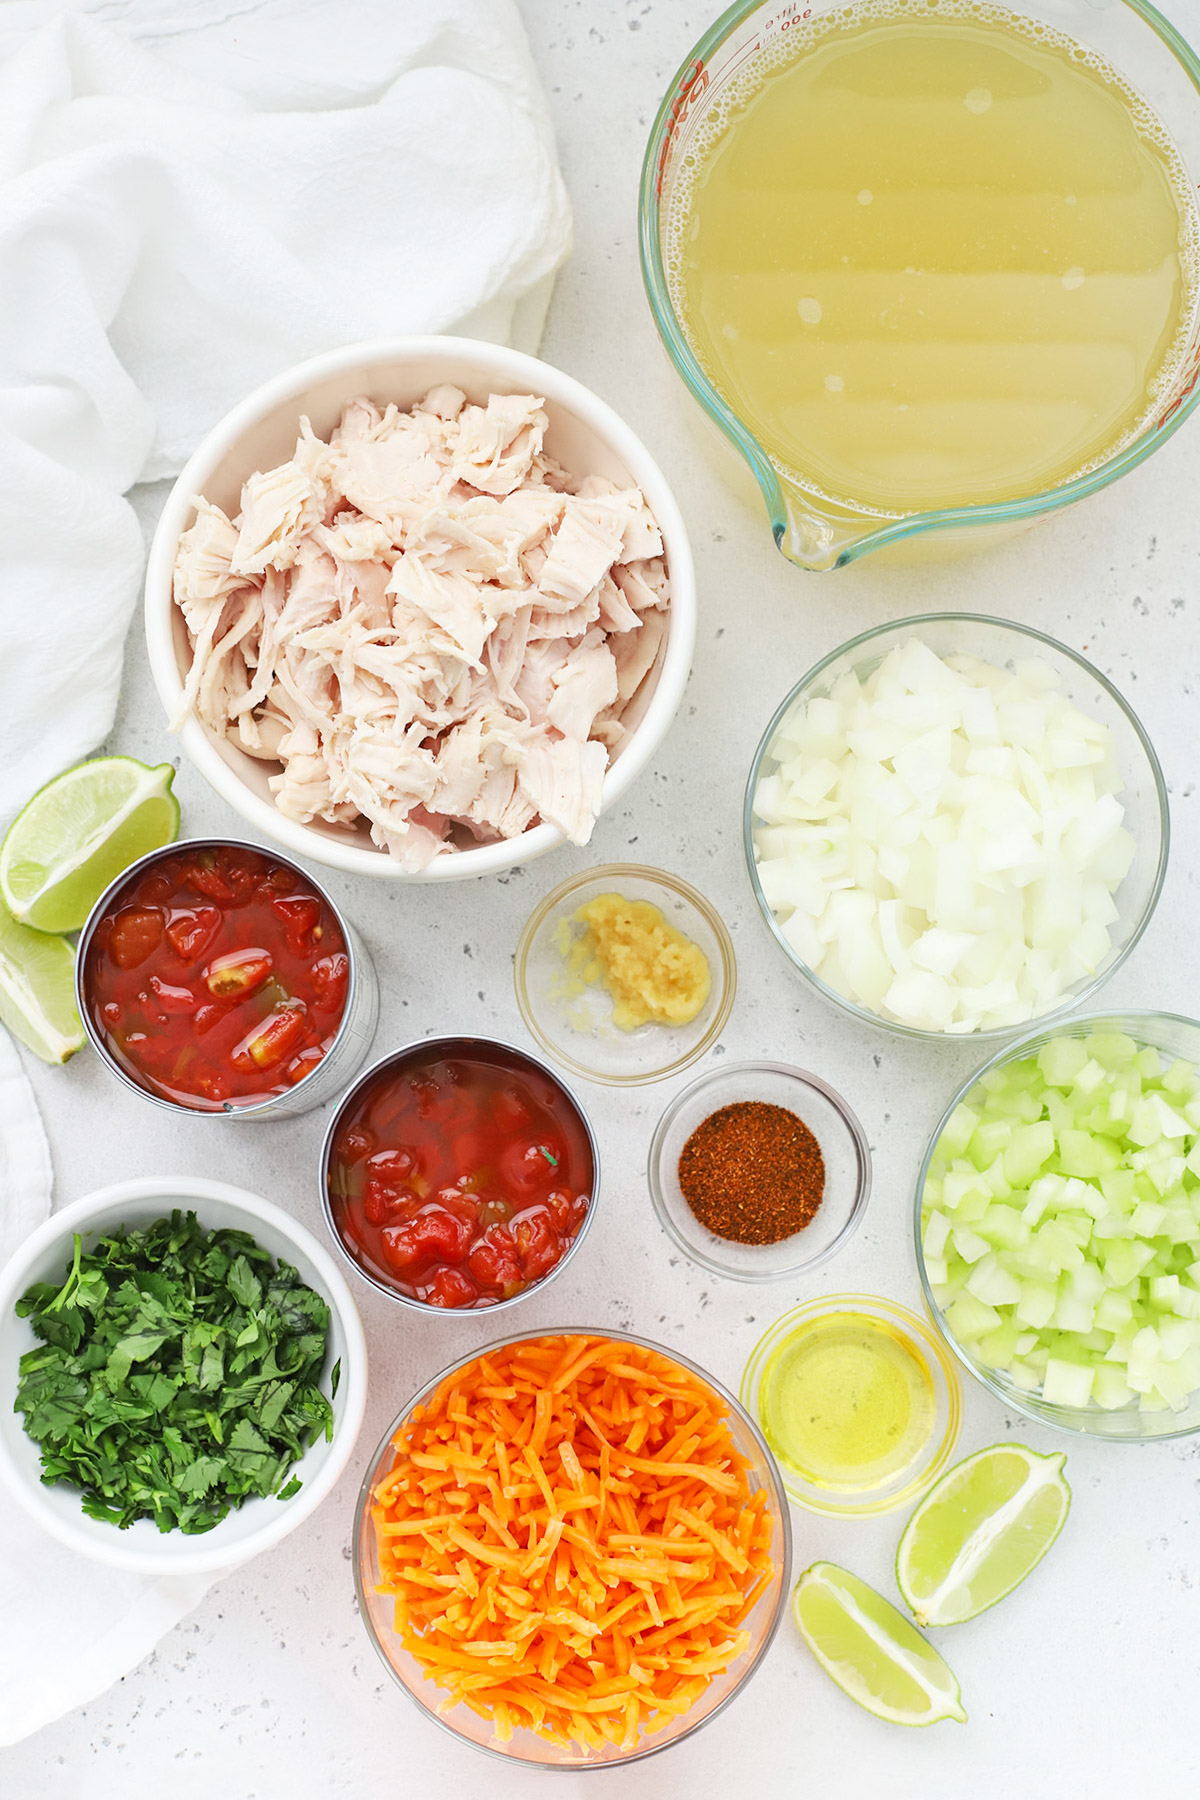 Ingredients for sopa de lime (chicken lime soup)